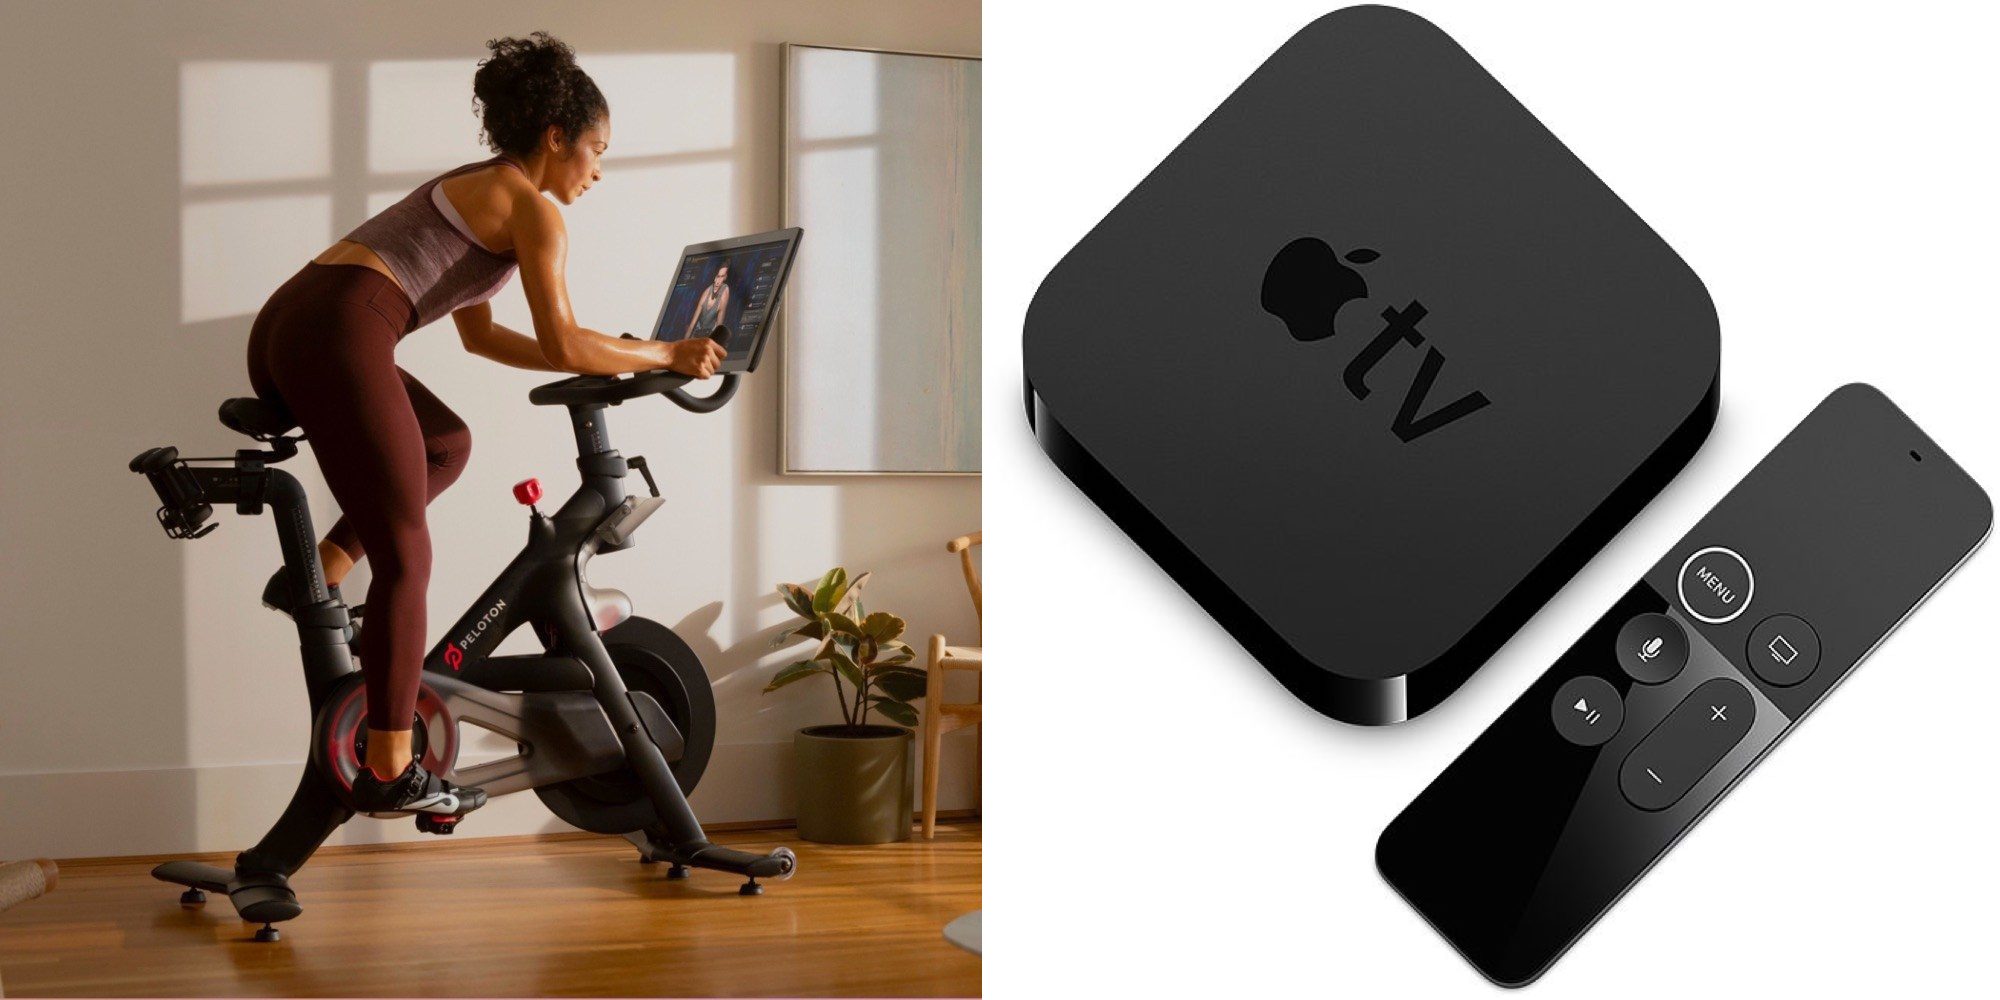 Apple Tv Gains Peloton Workout App Following Fire Tv And Chromecast Support 9to5mac